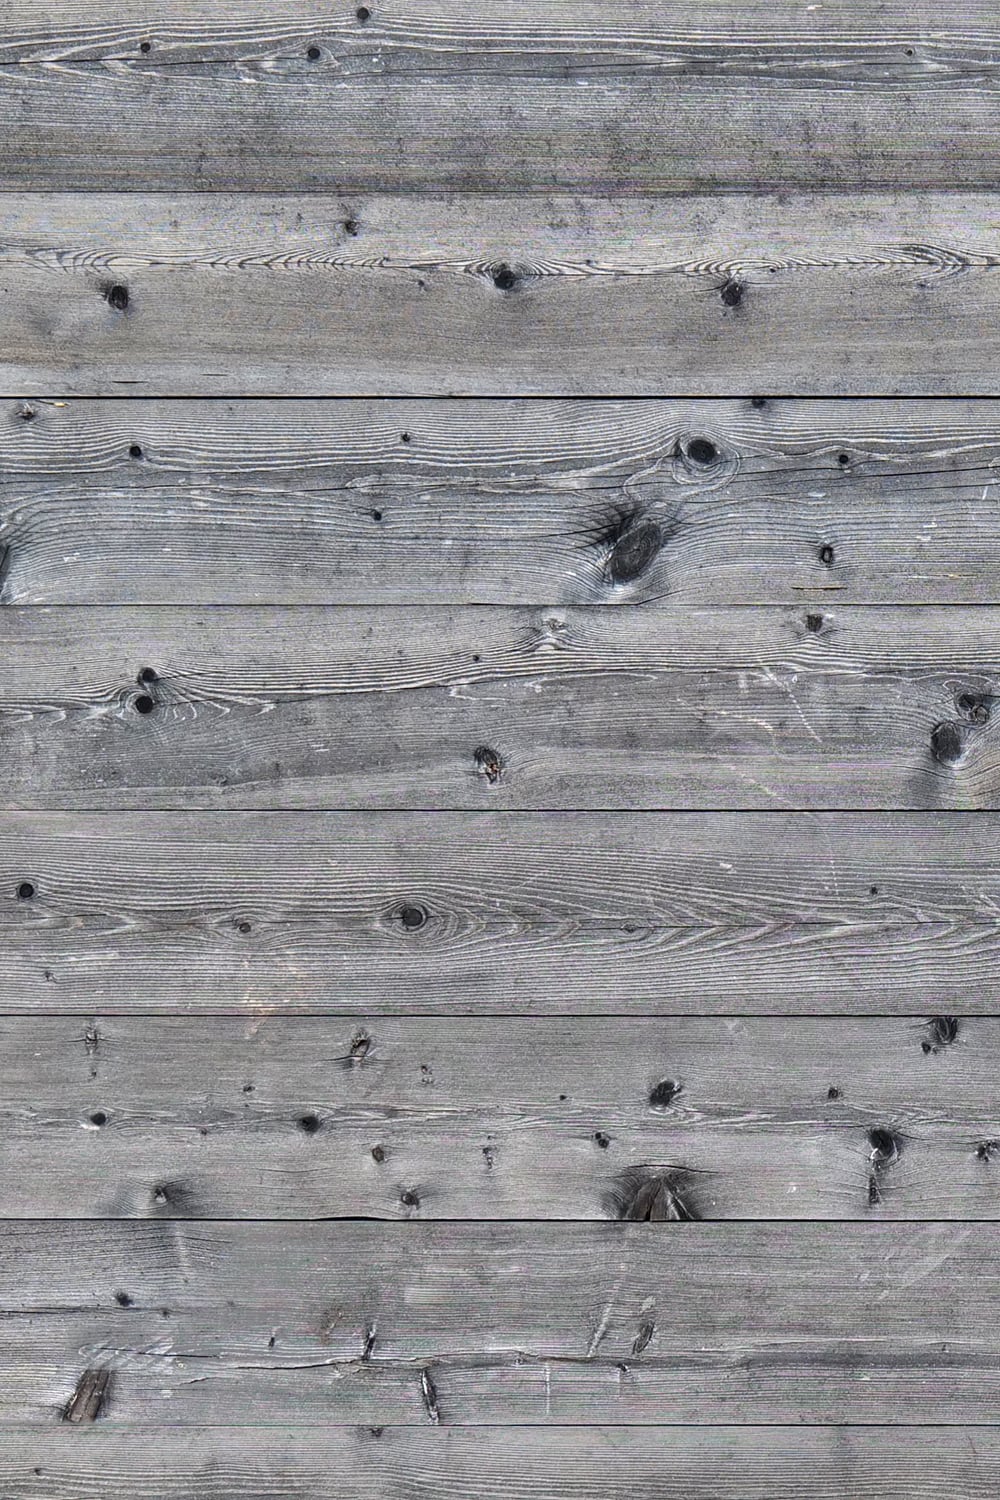 Unpainted wood plank fence 2 - close-up